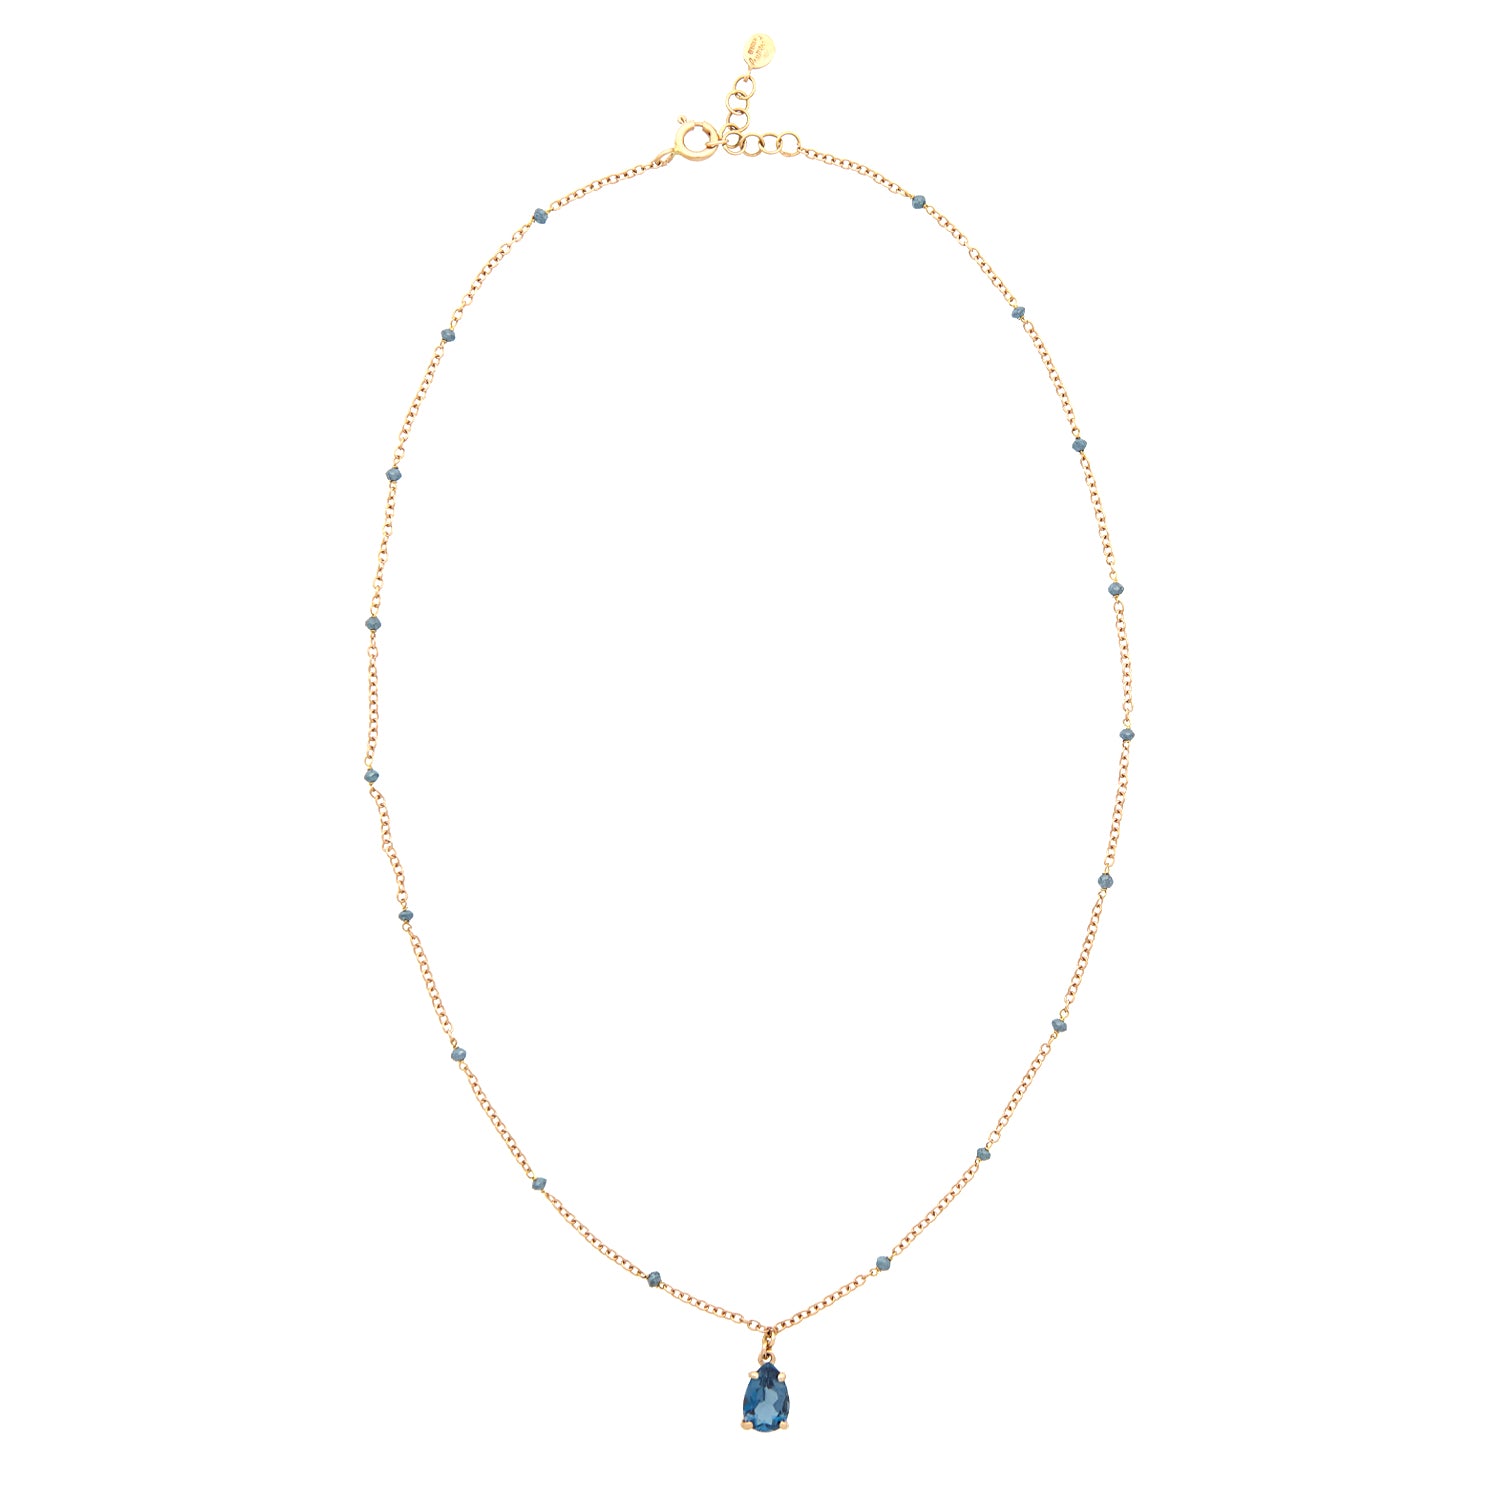 ROSE GOLD NECKLACE WITH LONDON BLUE TOPAS